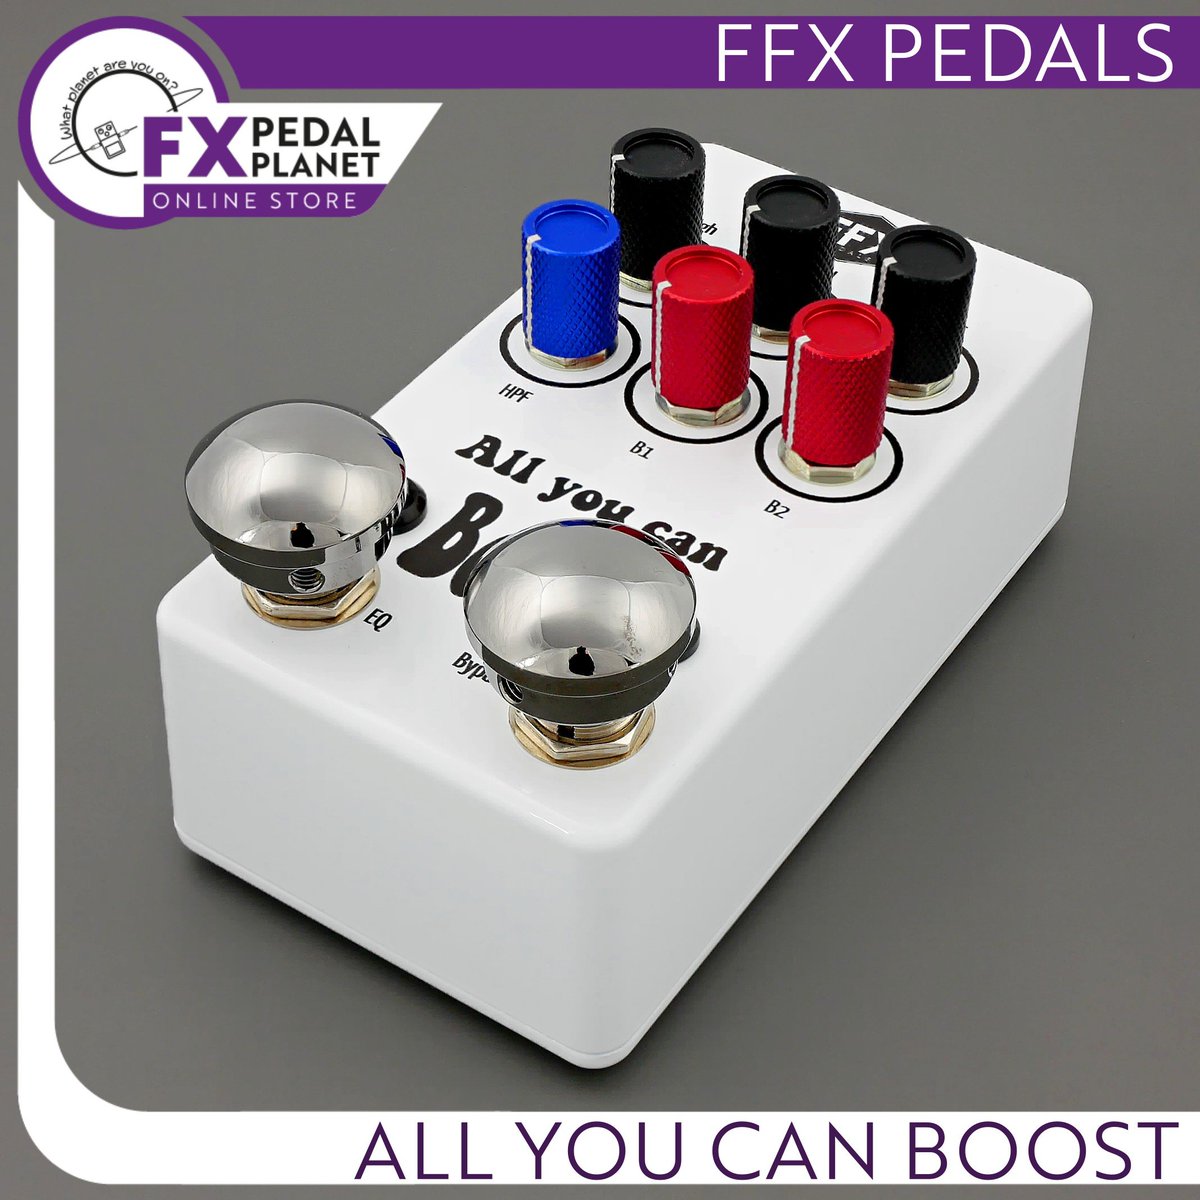 @FfxPedals All You Can Boost with Pedal Room Italy footswitch covers. Both available at fxpedalplanet.co.uk

#fxpedalplanet #fxpedalplanetonlinestore

#ffxpedals #allyoucanboost #ffxpedalsallyoucanboost #boostpedal #overdrivepedal

#handmadepedals #boutiqueeffectspedals